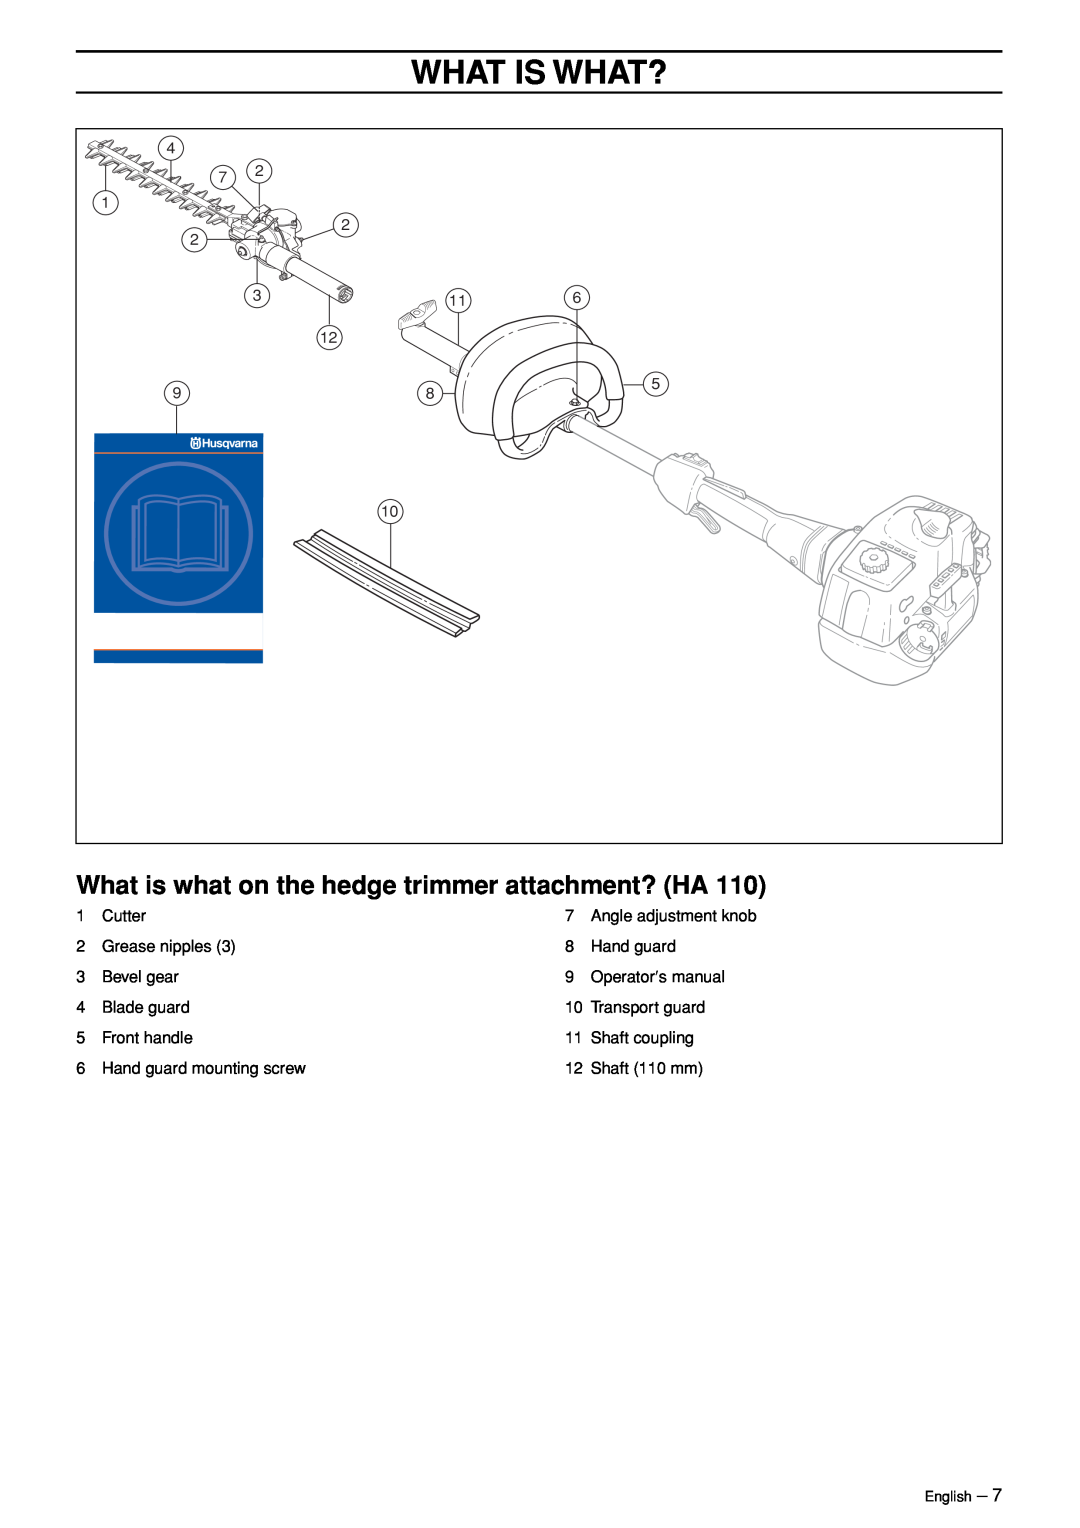 Husqvarna HA 110, HA 110 manual What Is What?, What is what on the hedge trimmer attachment? HA 